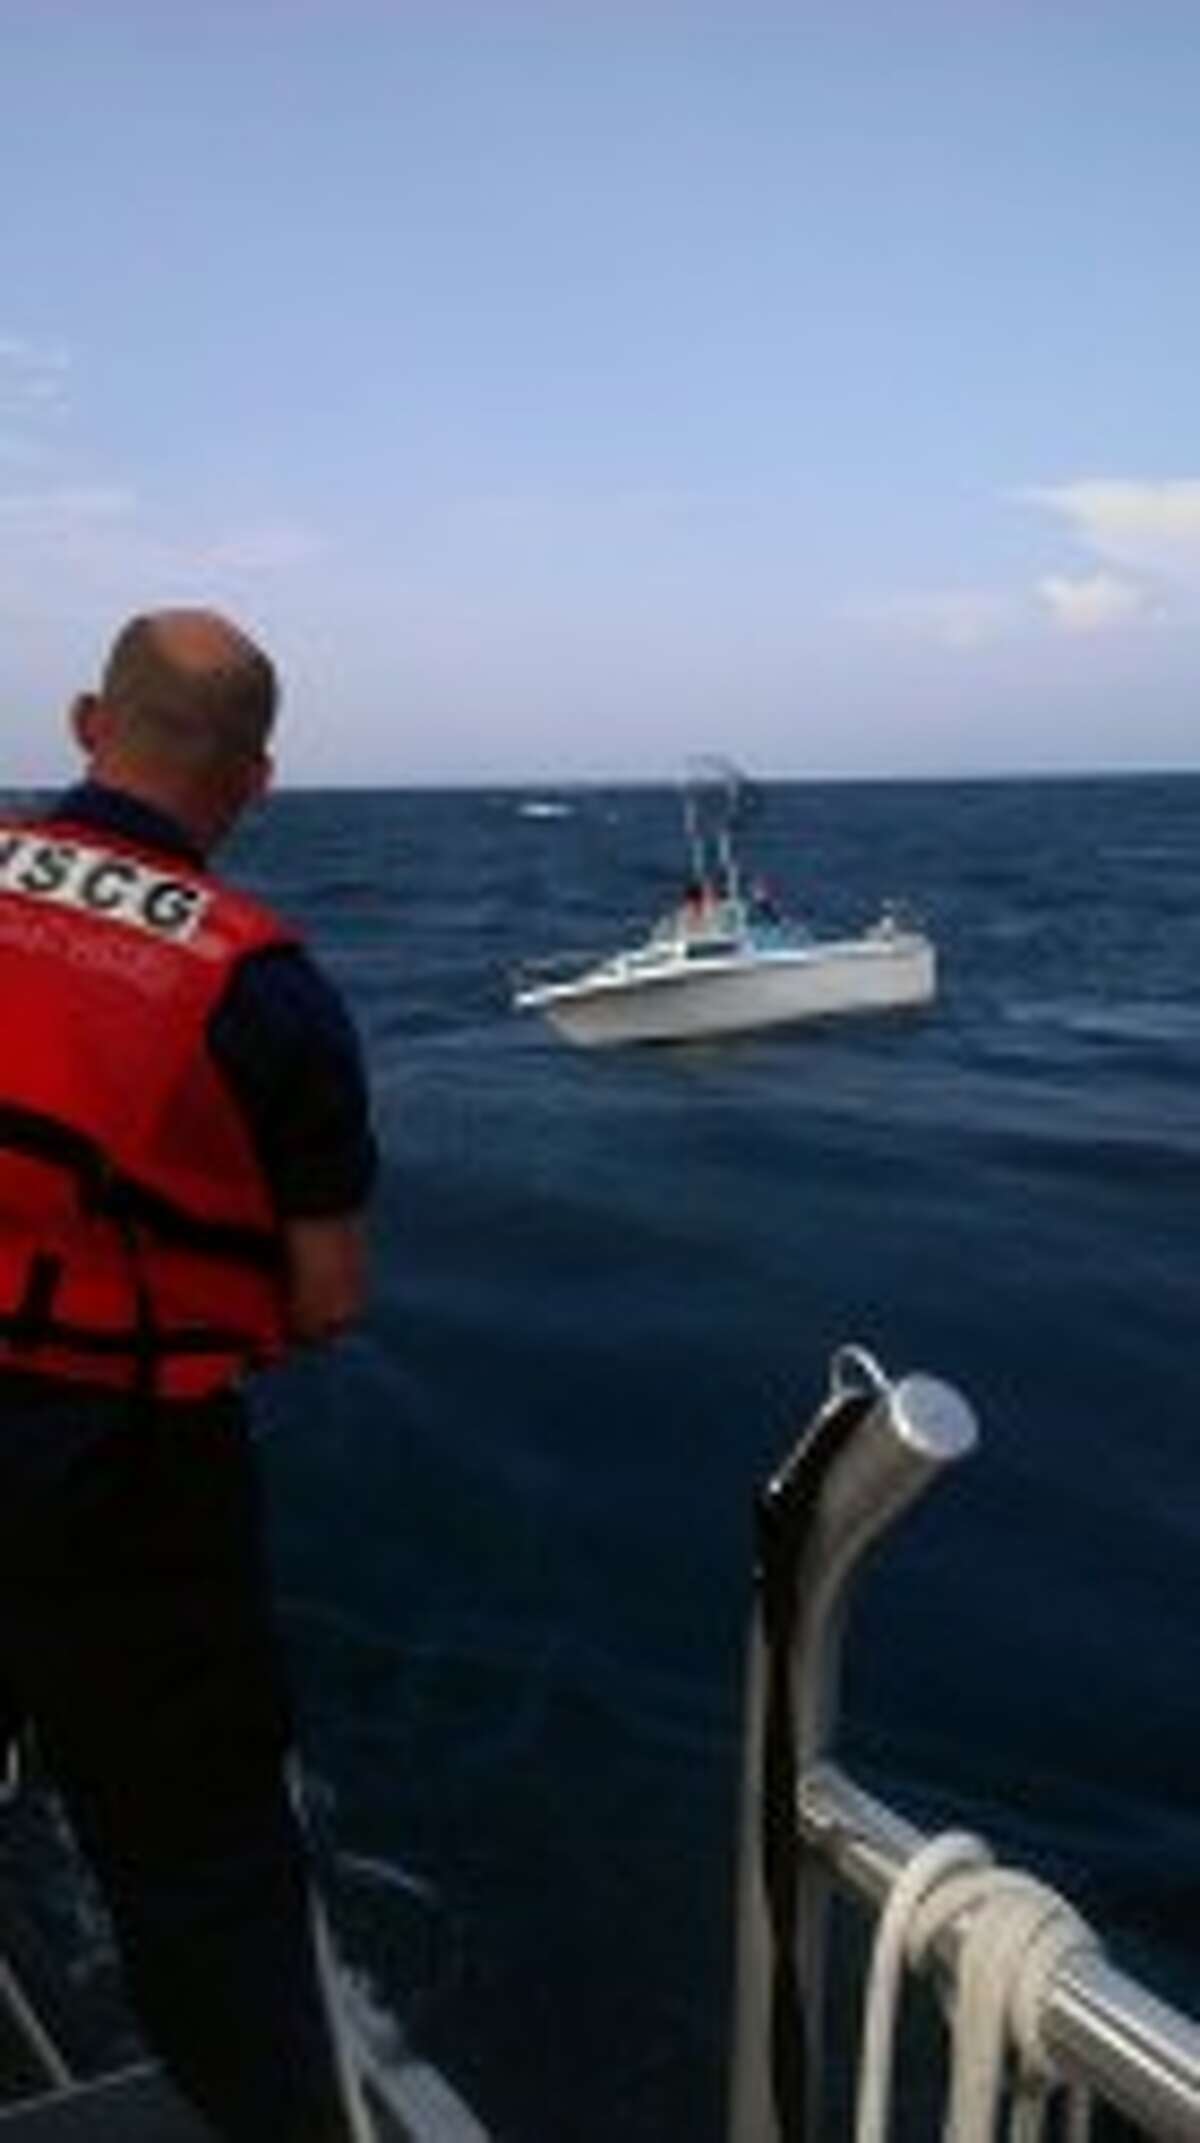 U.S. Coast Guard Station Manistee petty officer Craig Campbell assisted in helping a stranded boat on Friday.